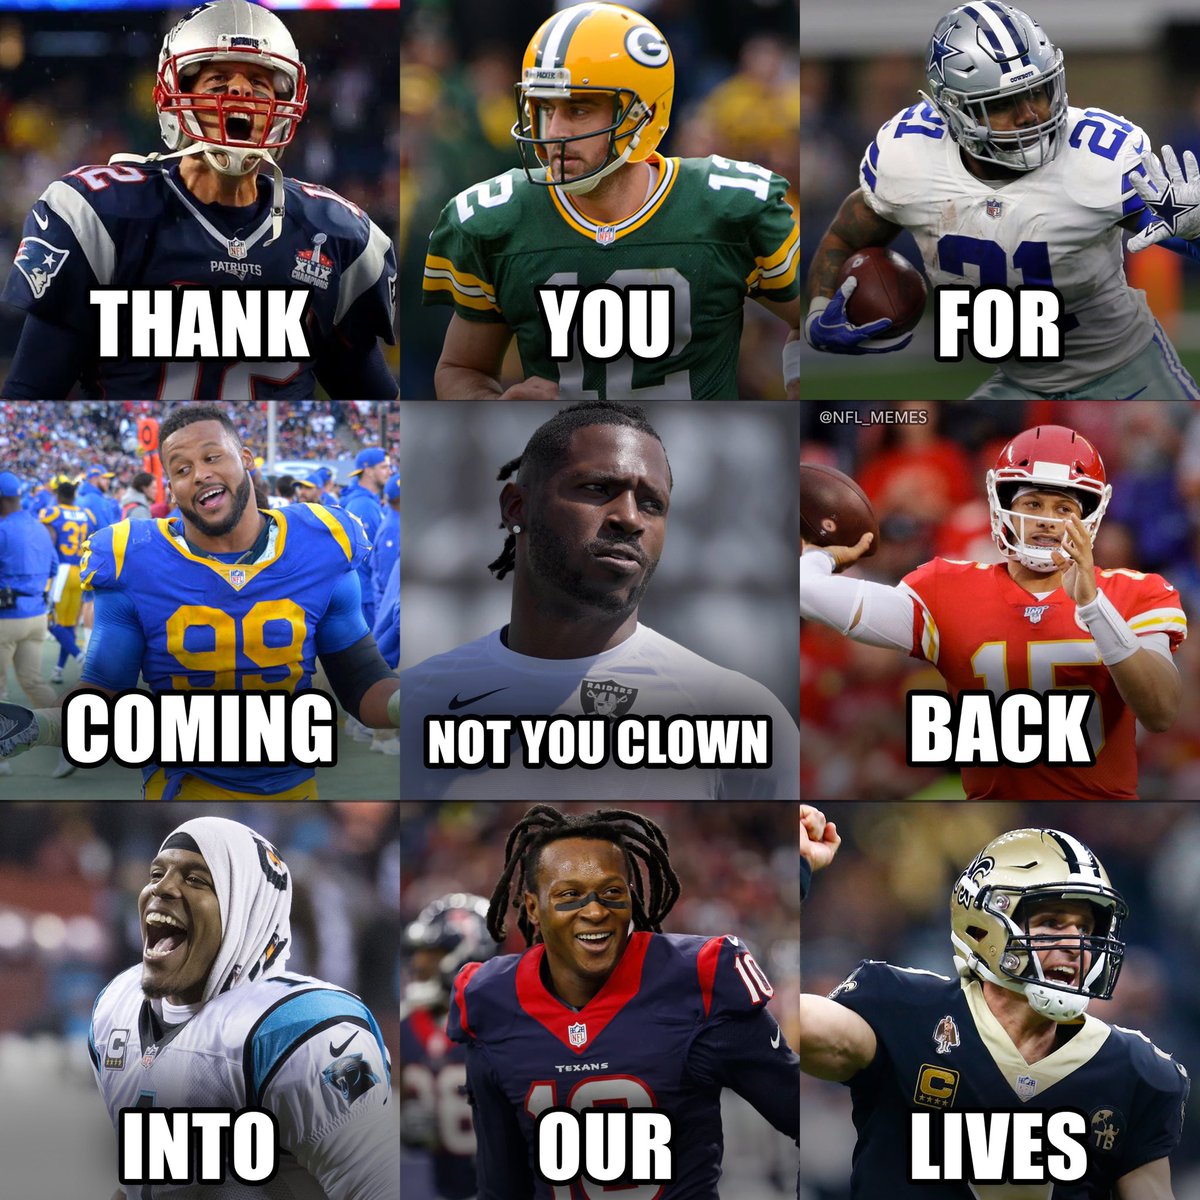 nfl memes - jersey - Or Patriots Thank You For Coming Not You Clown Not You Clown Back Texans Into Our Lives